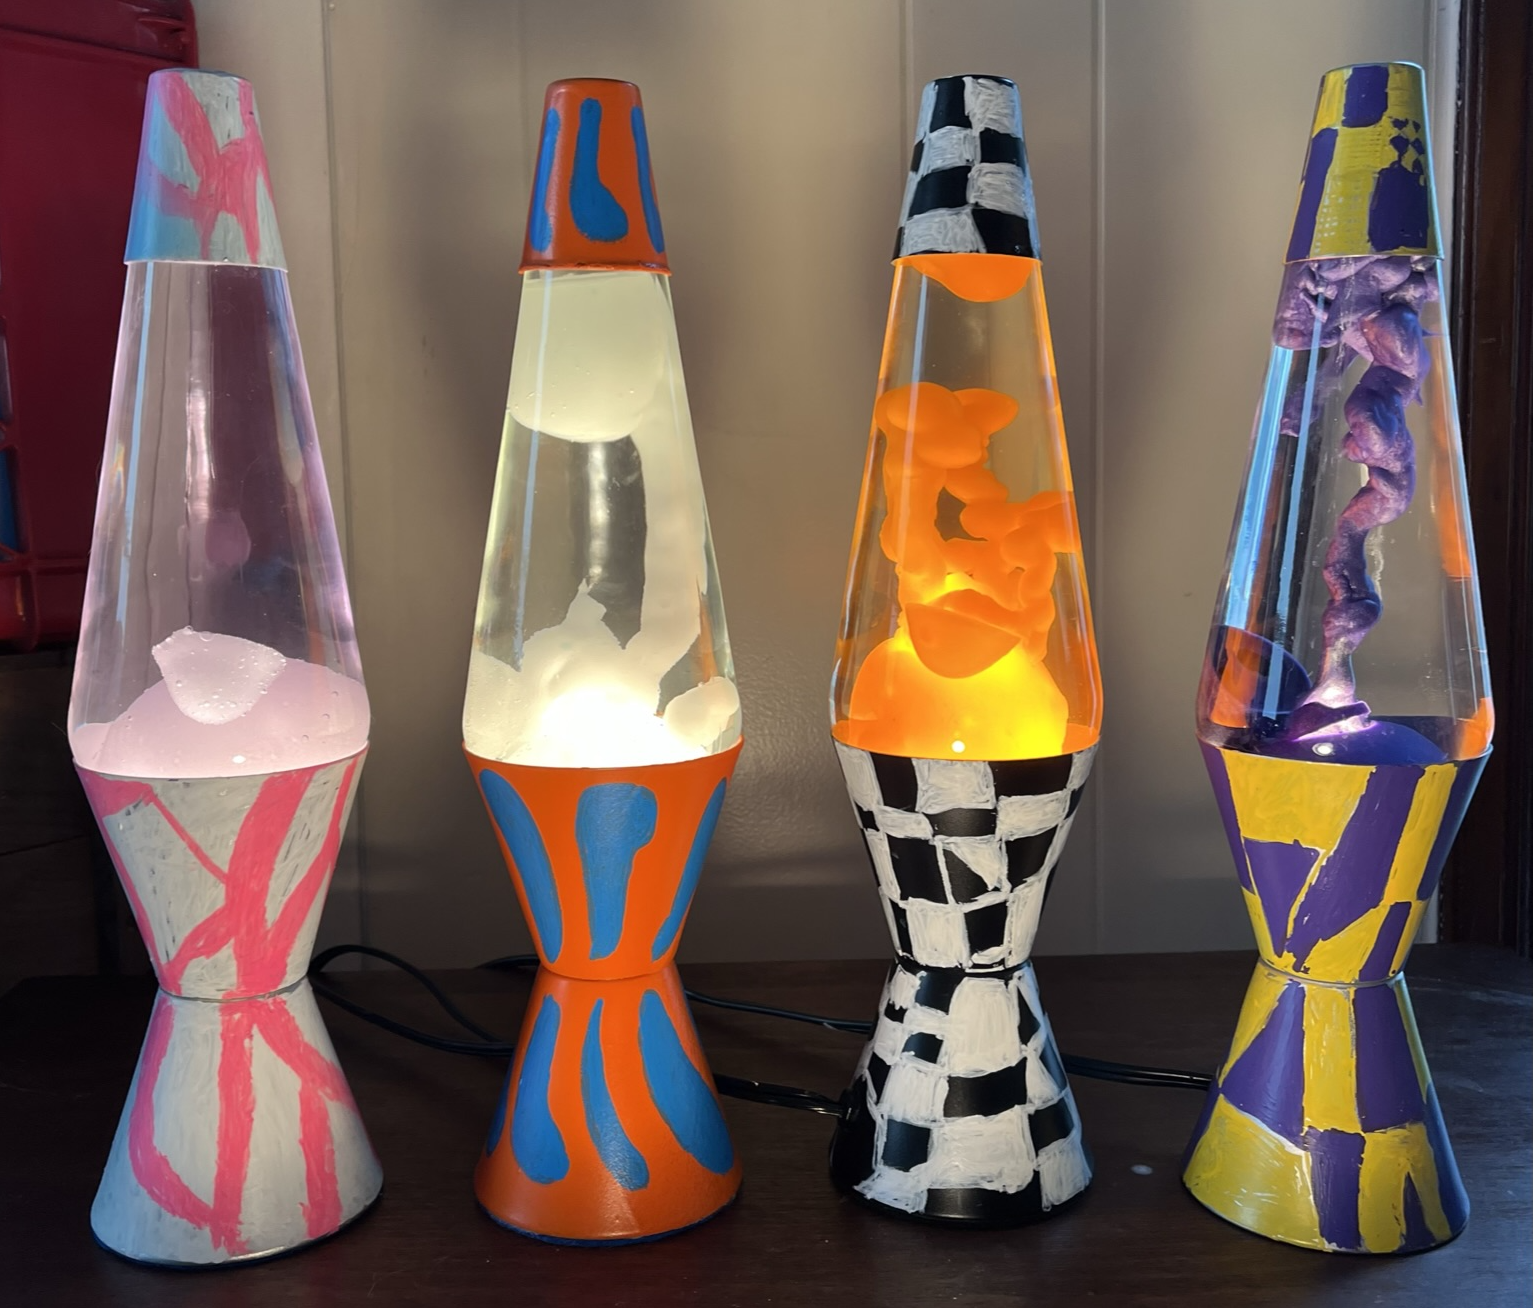 The History of the Lava Lamp, Arts & Culture